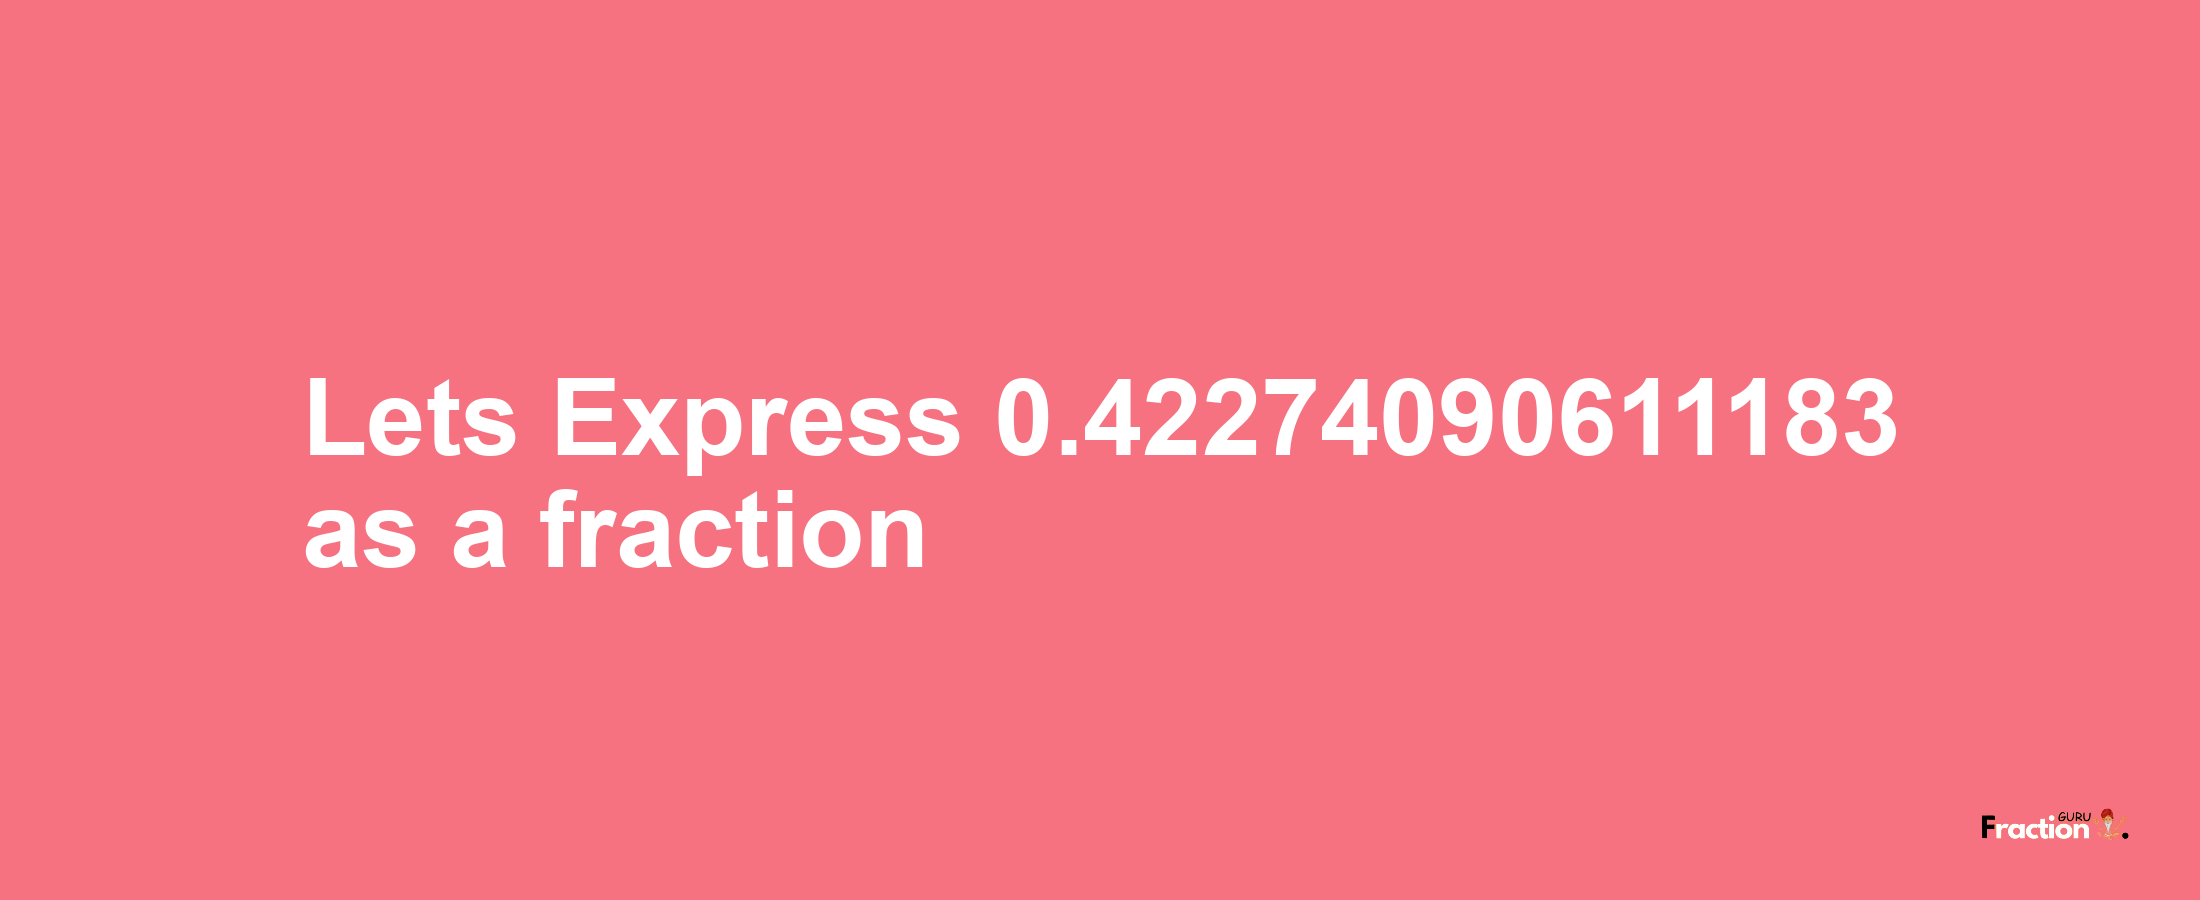 Lets Express 0.42274090611183 as afraction